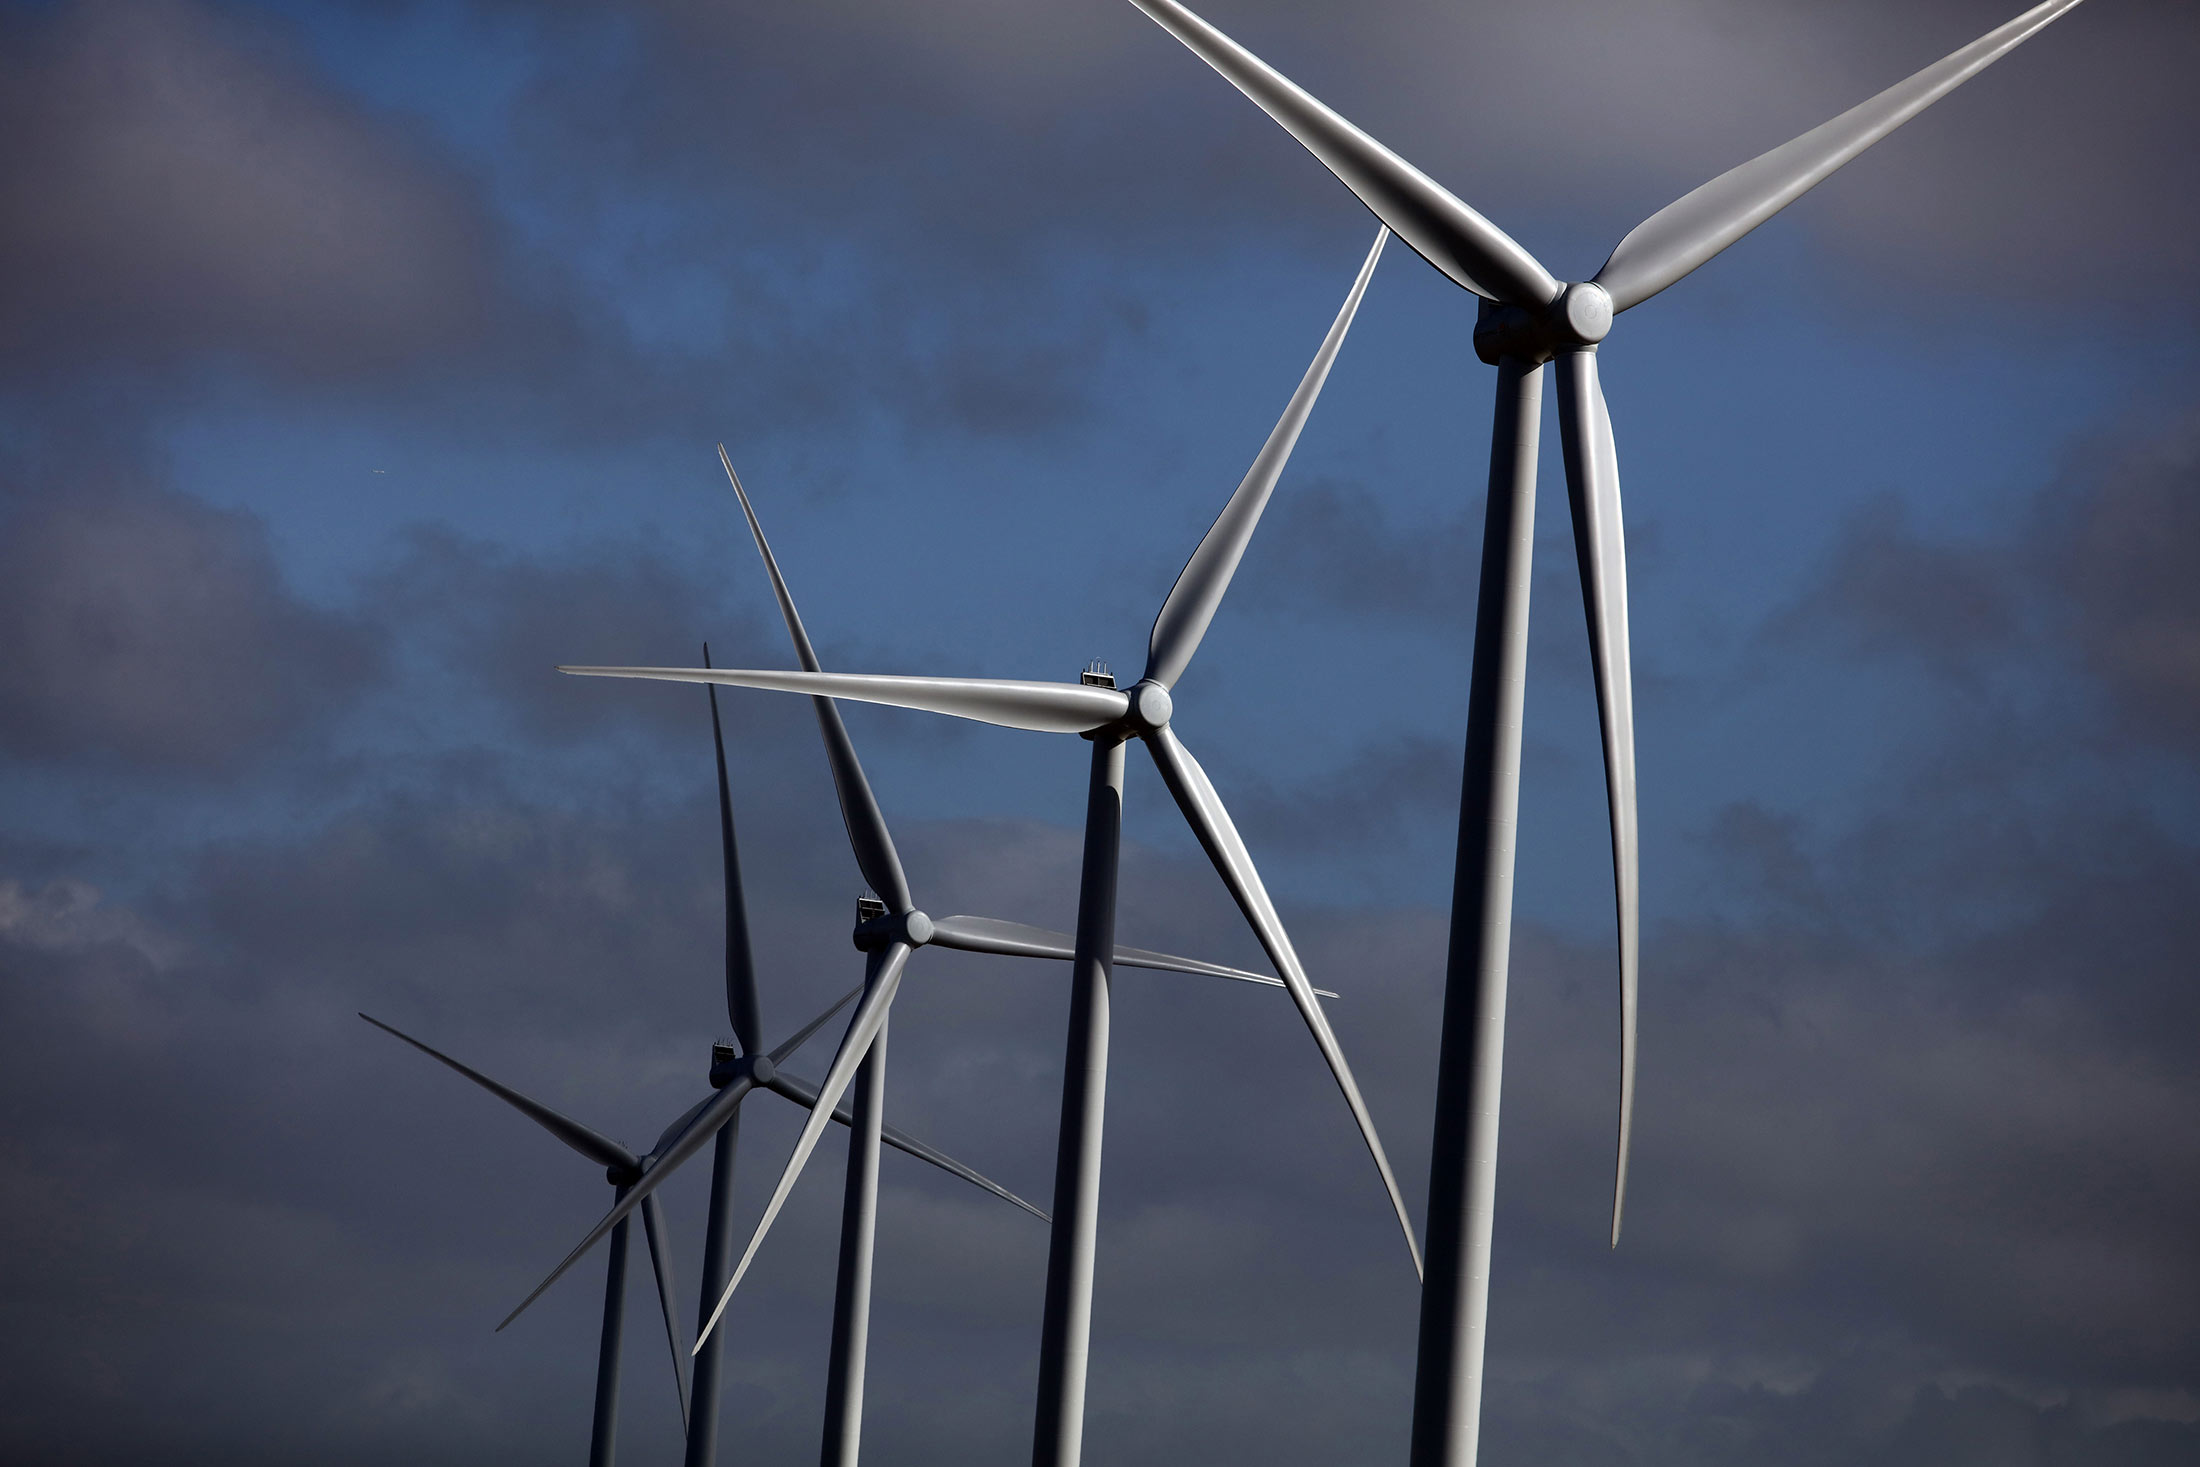 Swiss MECI Group Signs Deal in Iran for $839 Million Wind Farm